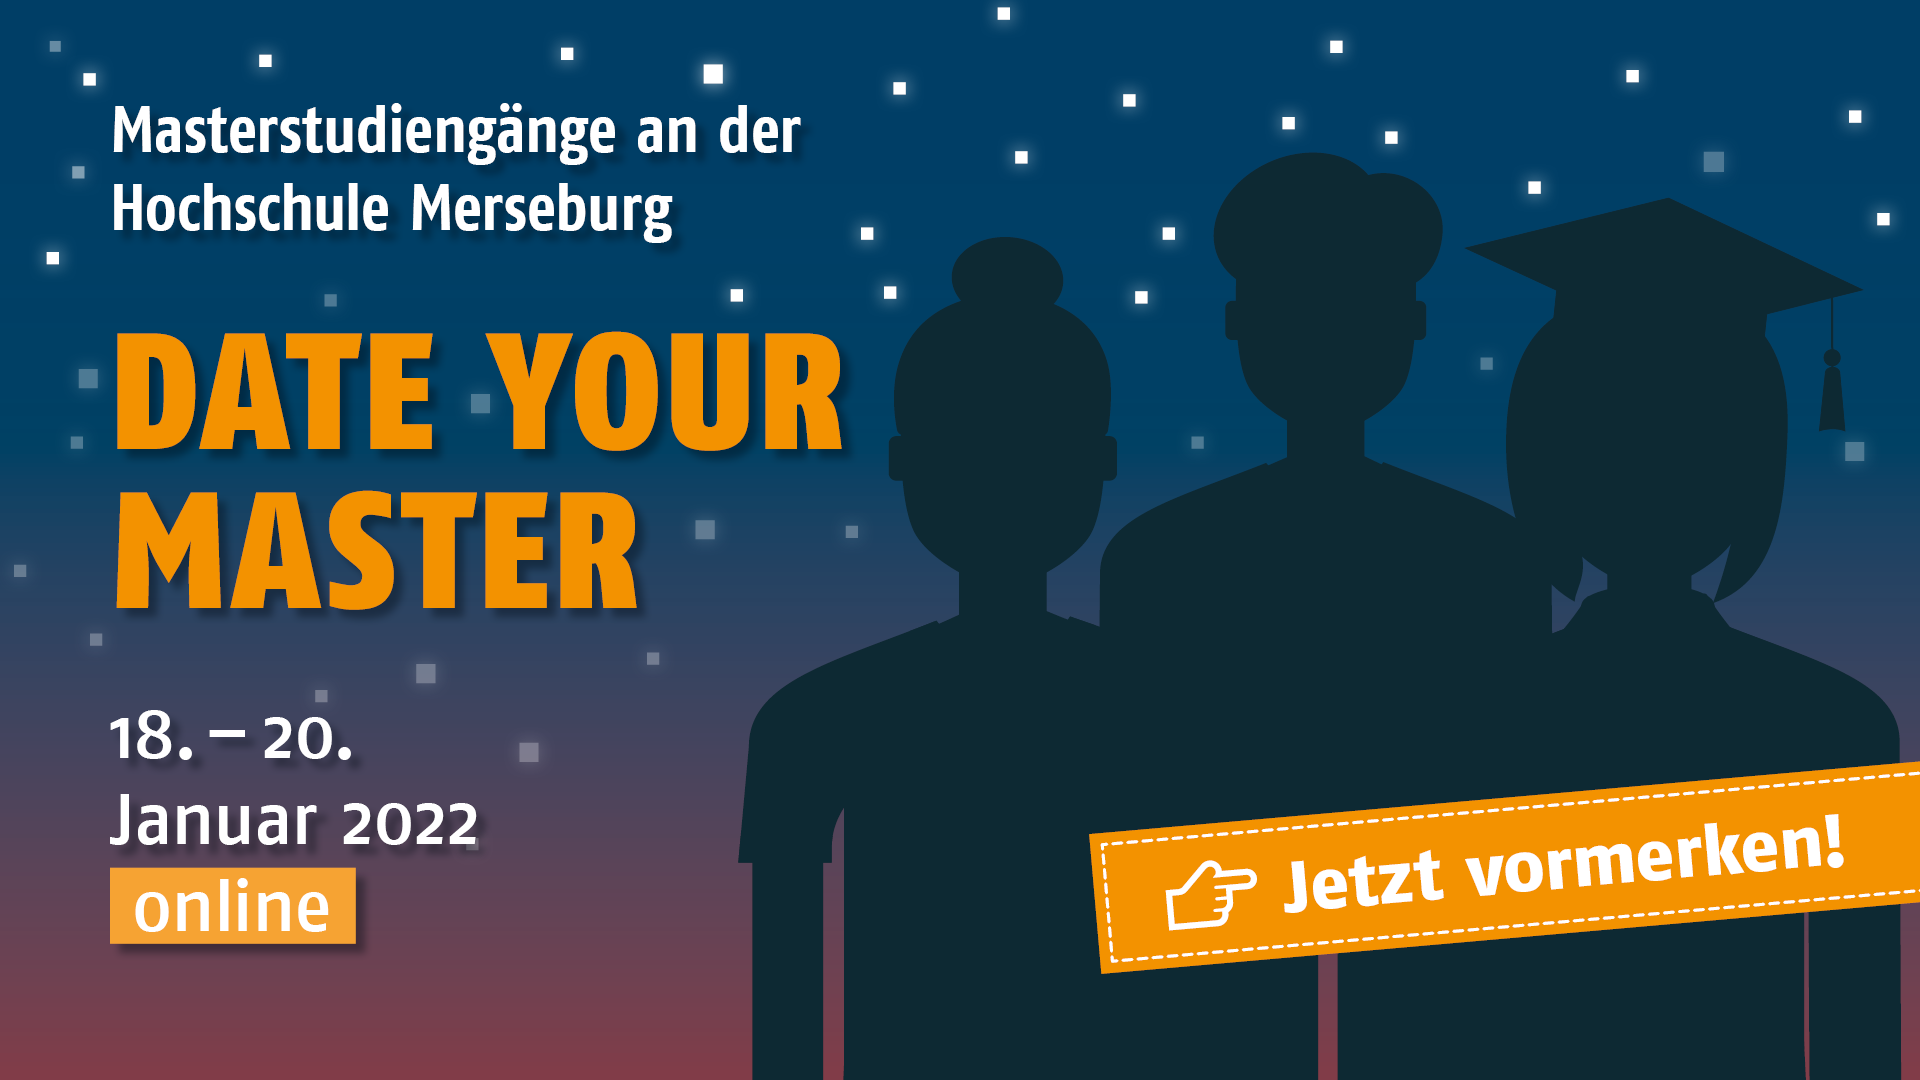 Date your Master - HS Merseburg